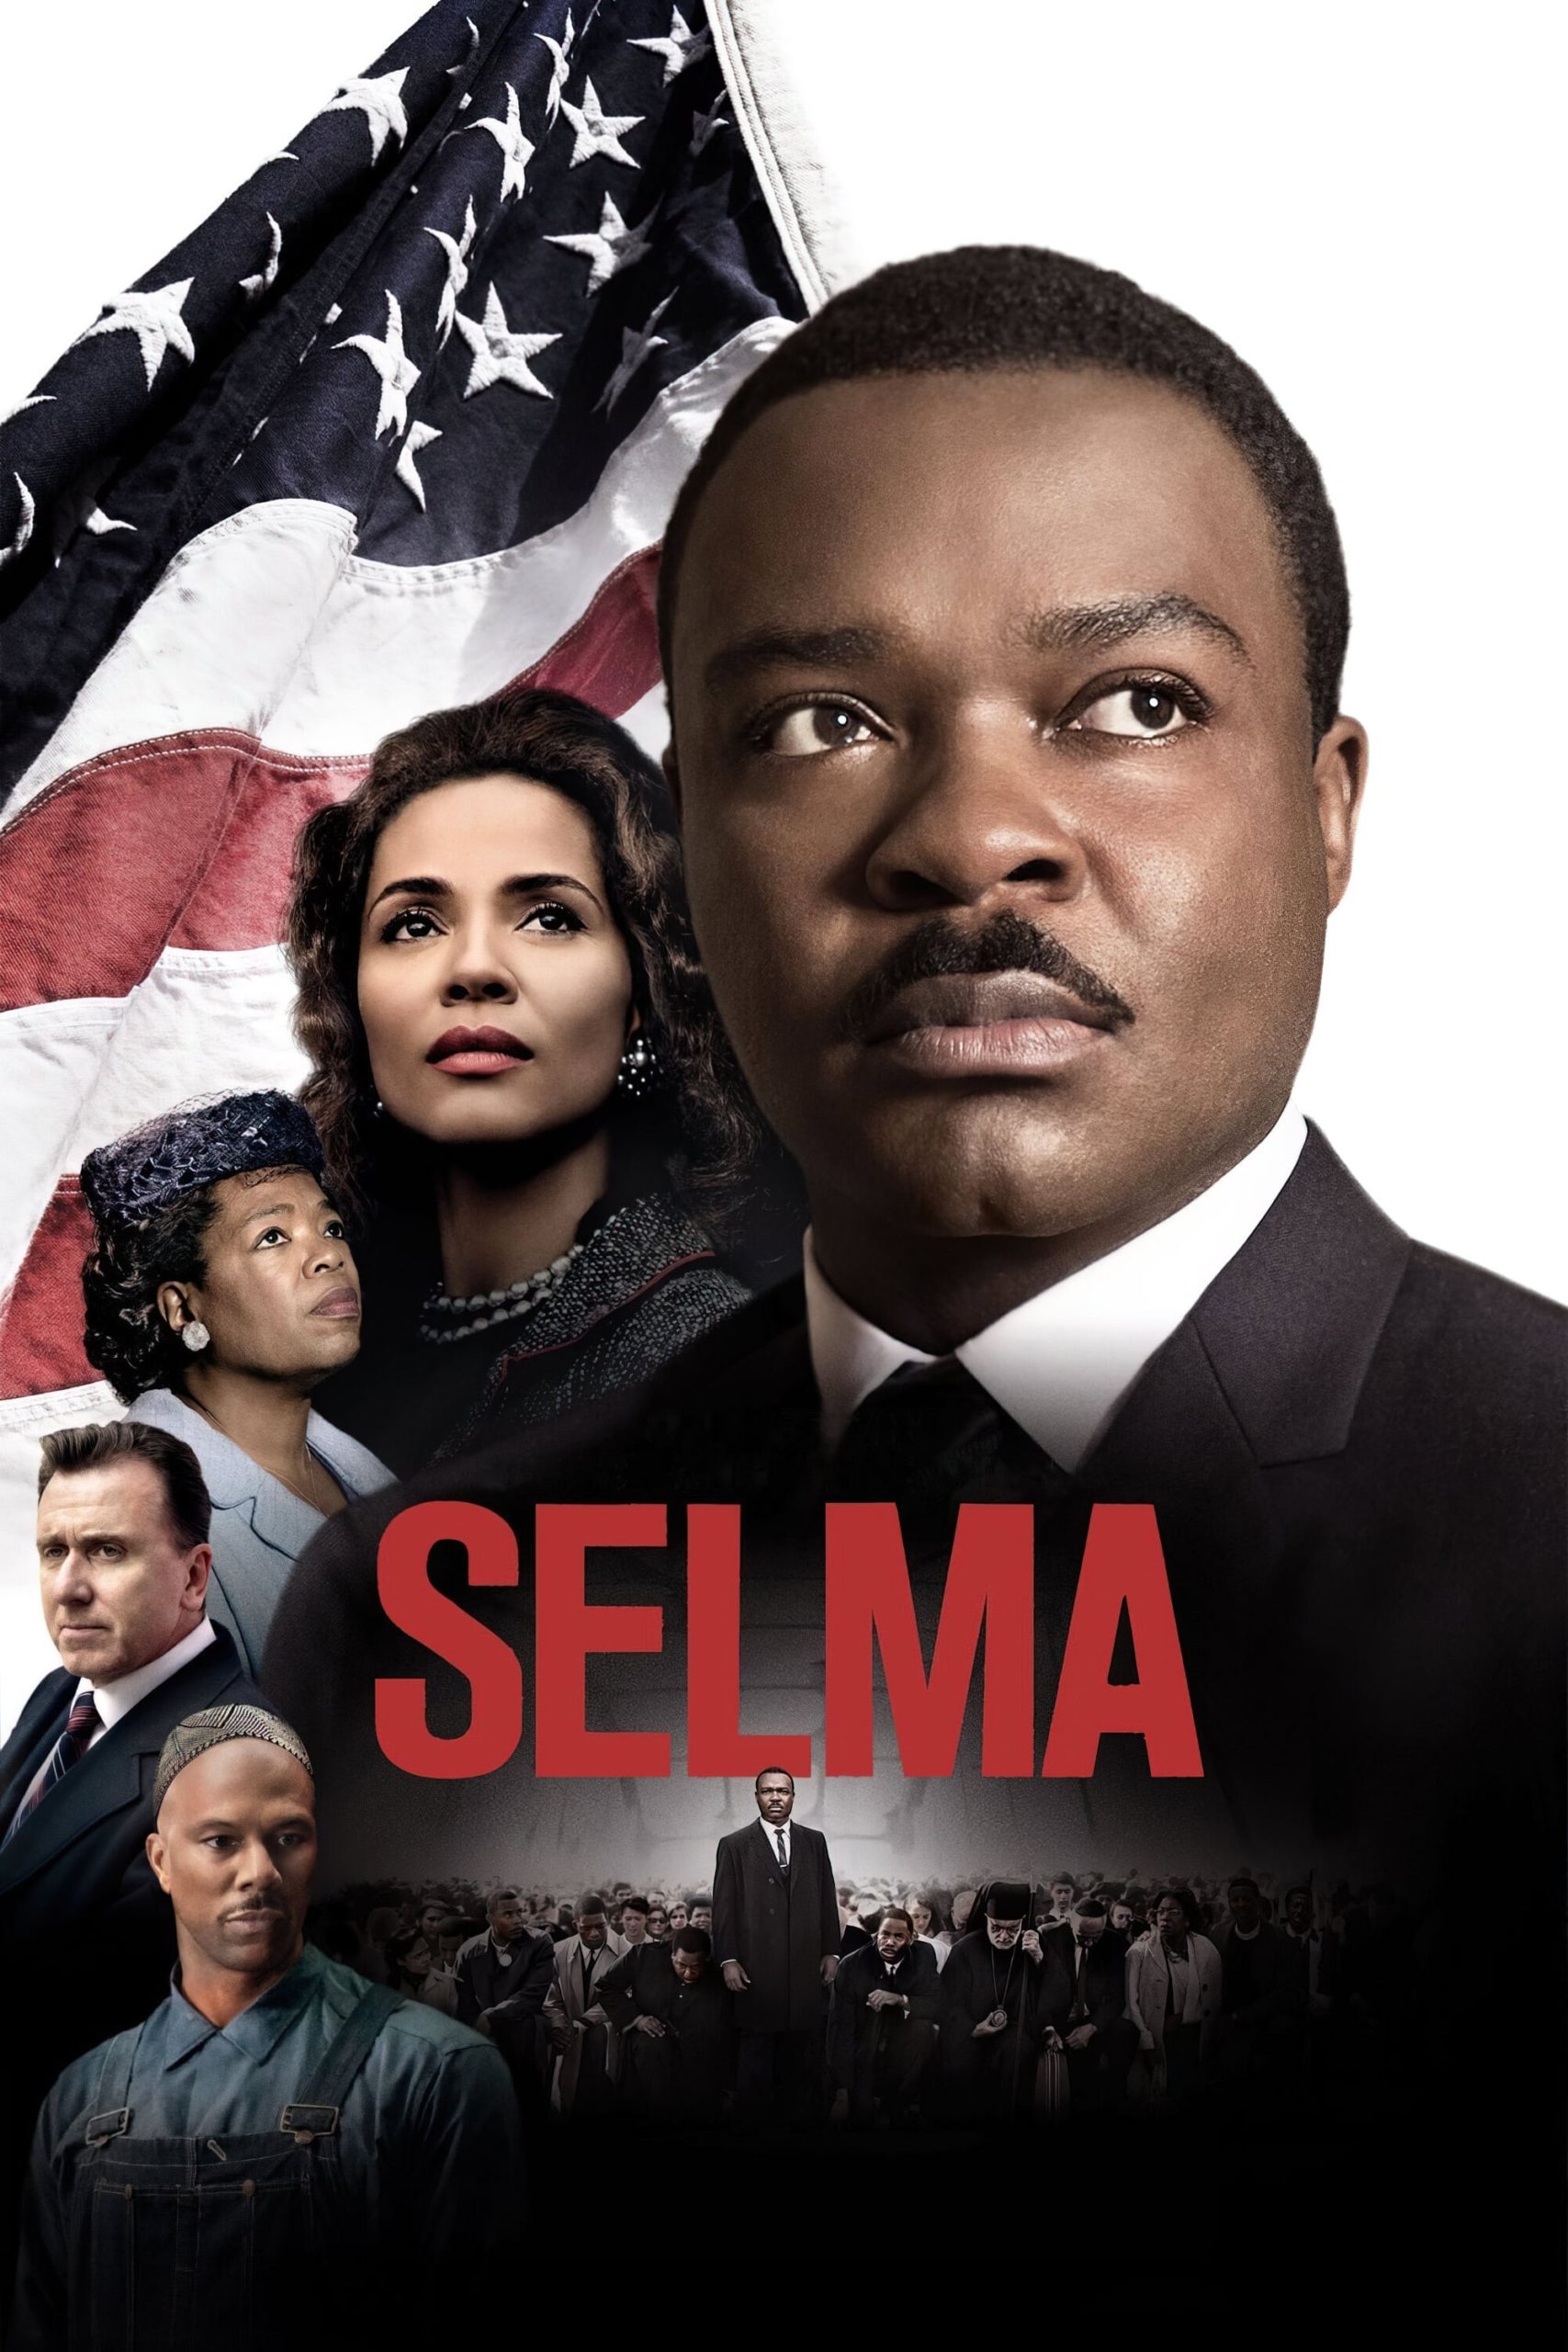 Selma movie thoughts & review